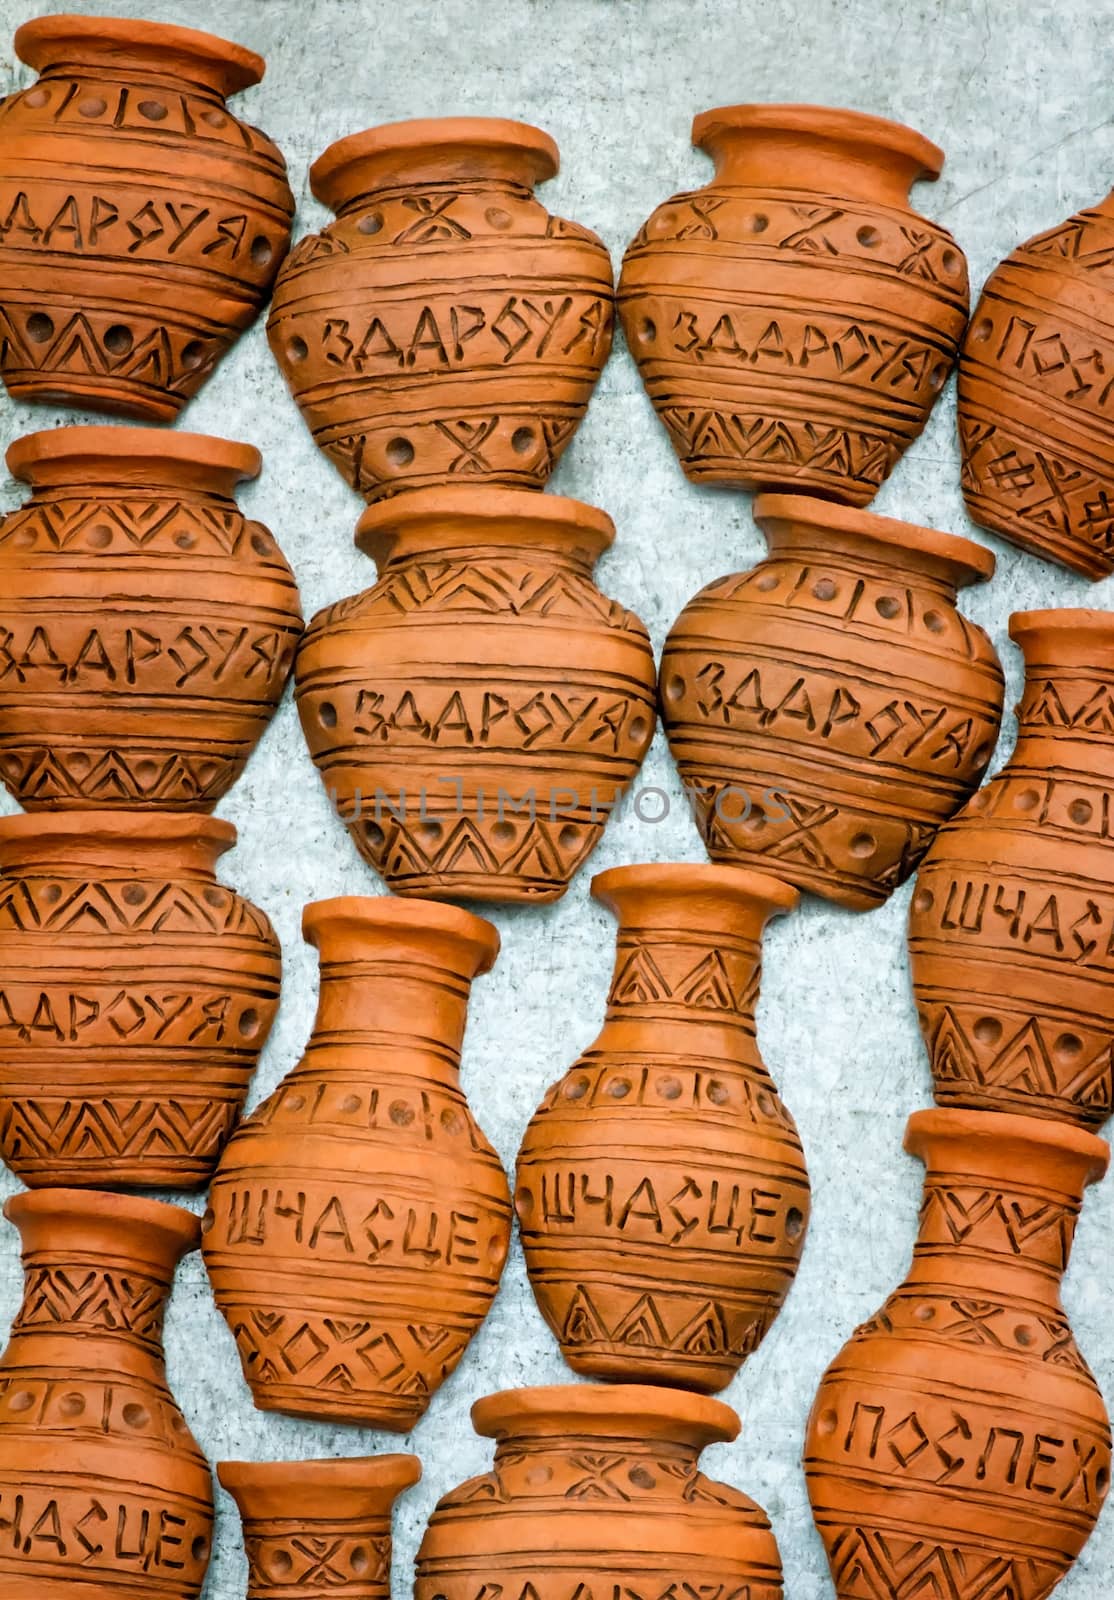 The souvenirs imitating clay jugs with inscriptions: health, happiness, success.